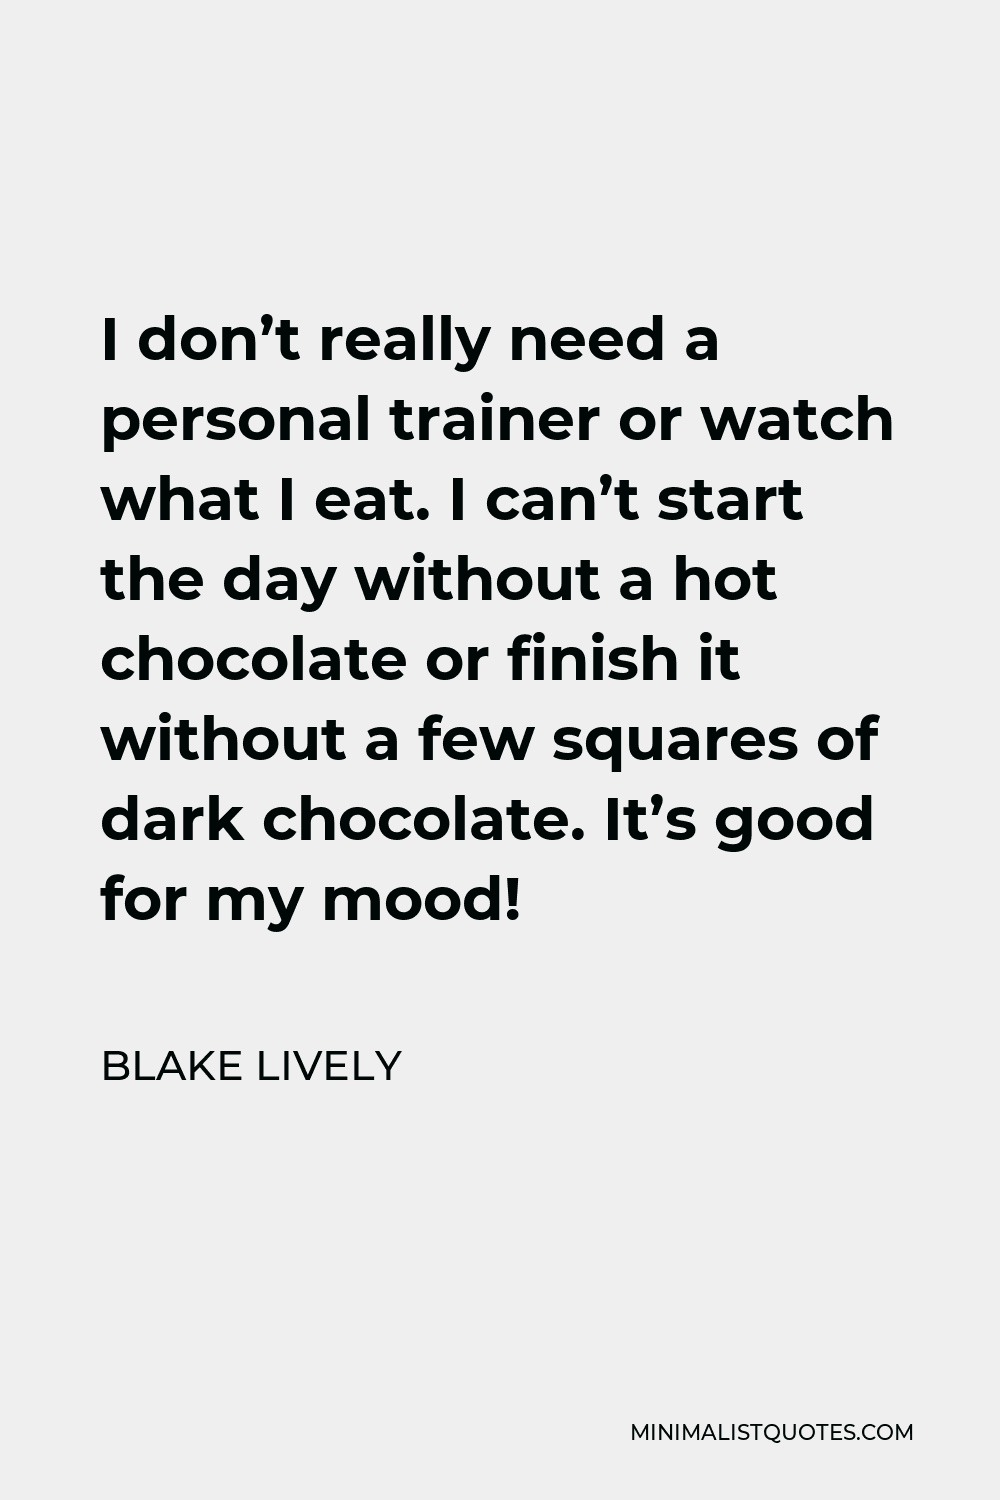 Blake Lively Quote - I don’t really need a personal trainer or watch what I eat. I can’t start the day without a hot chocolate or finish it without a few squares of dark chocolate. It’s good for my mood!